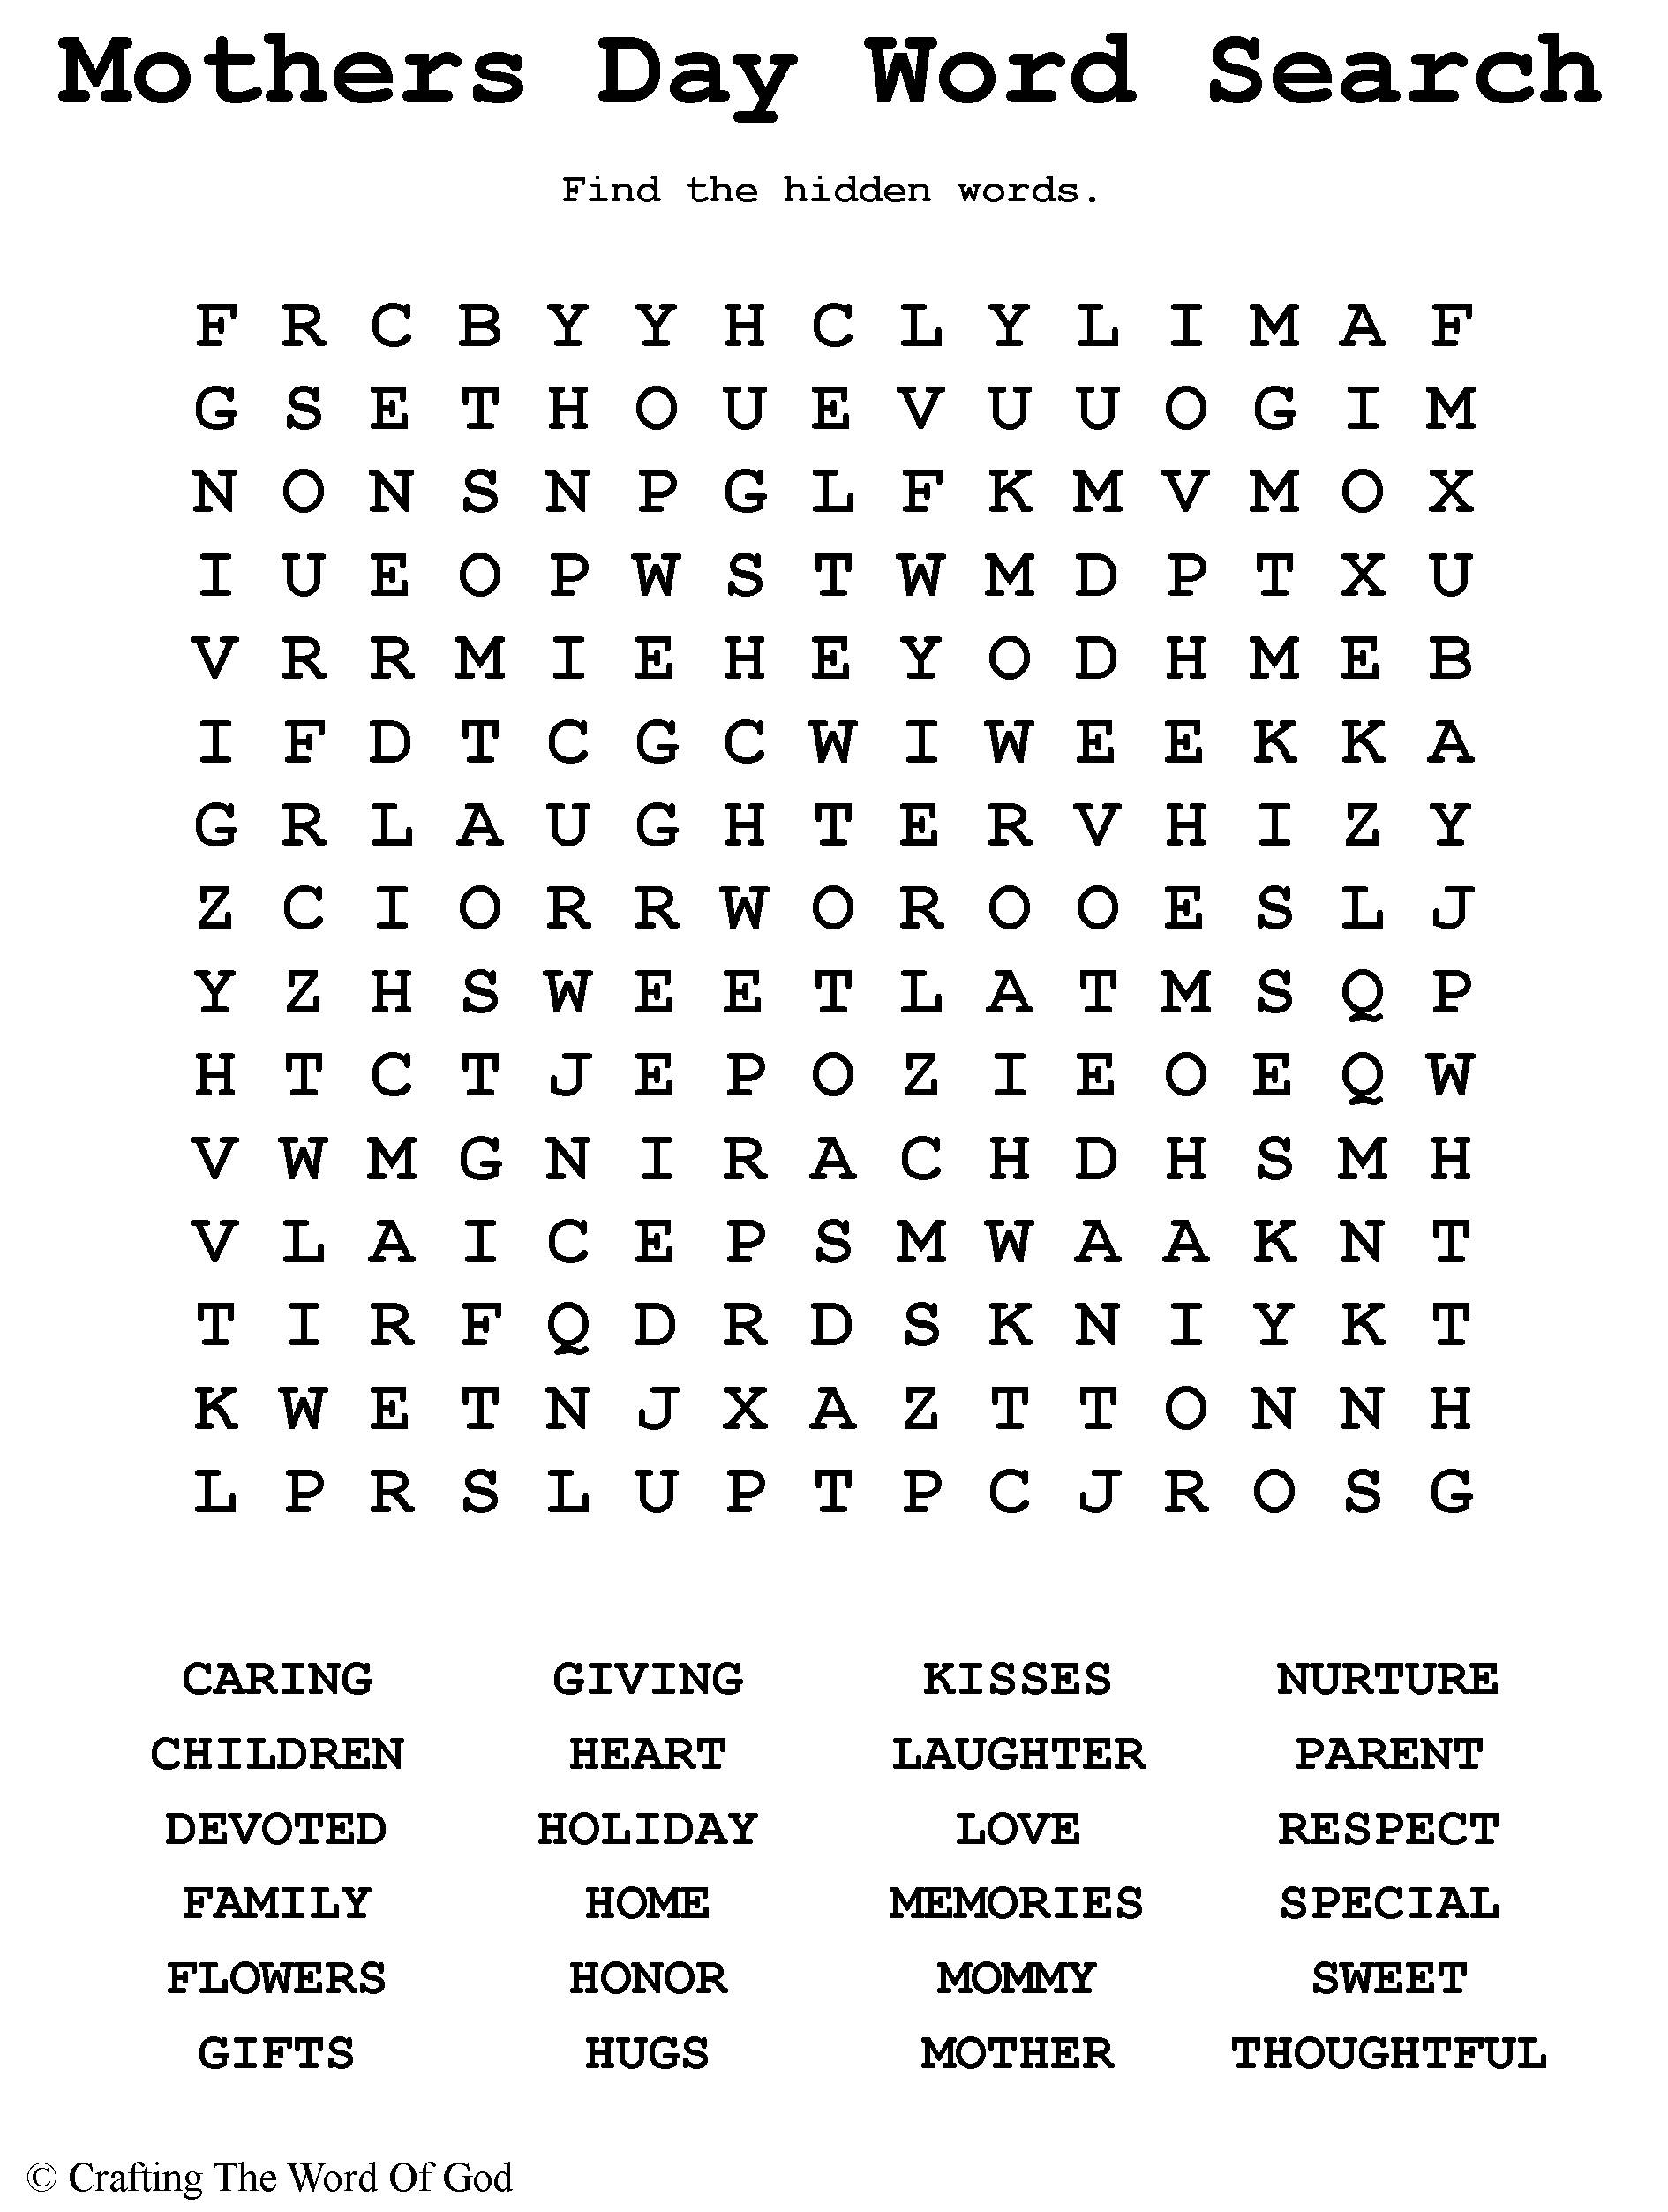 Mothers Day Word Search Activity Sheet Crafting The Word Of God